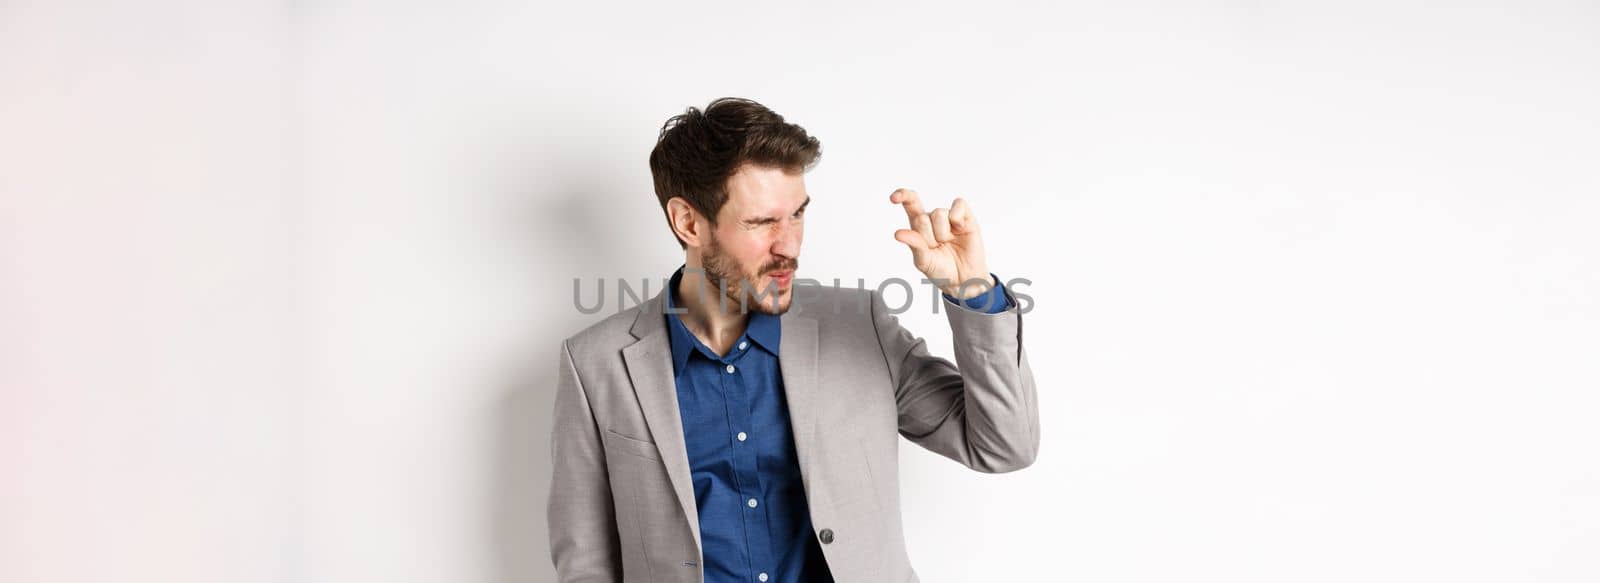 Businessman trying to see something tiny, showing little thing size with fingers, standing in suit on white background.